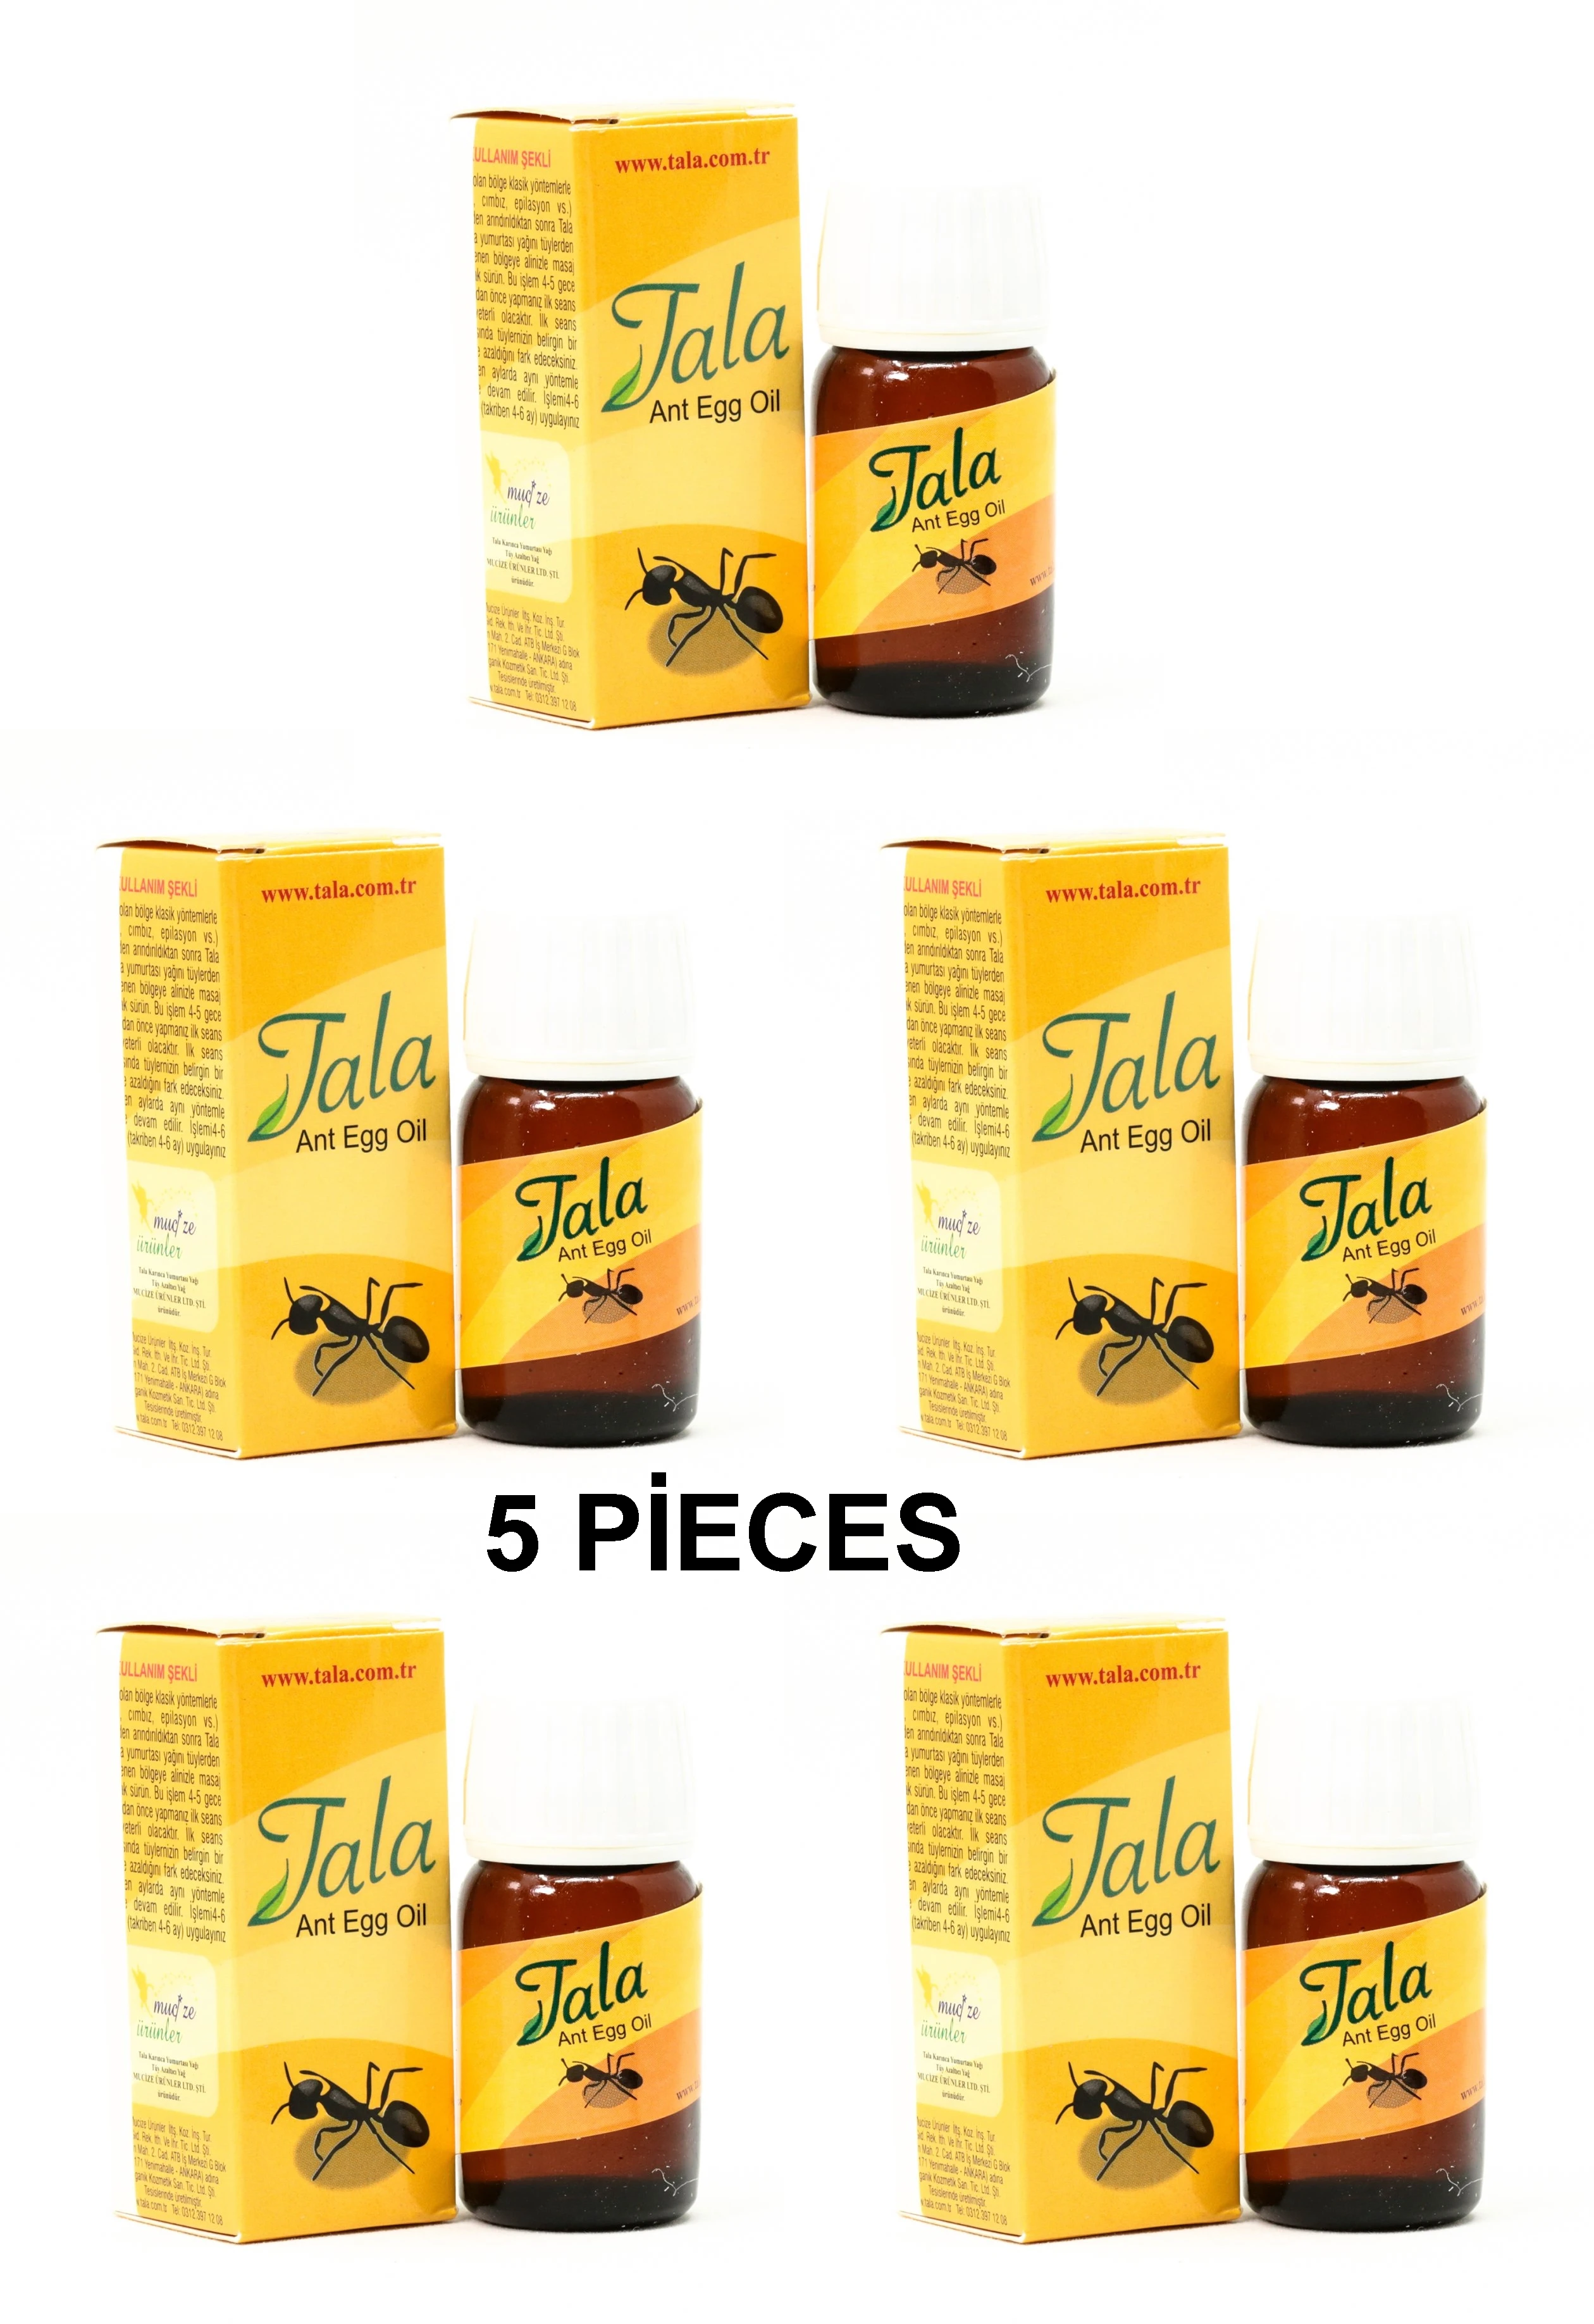 

5 pieces of 100% original Tala ant oil 5X20 ml natural organic hair removal, hair reduction. Permanent hair removal